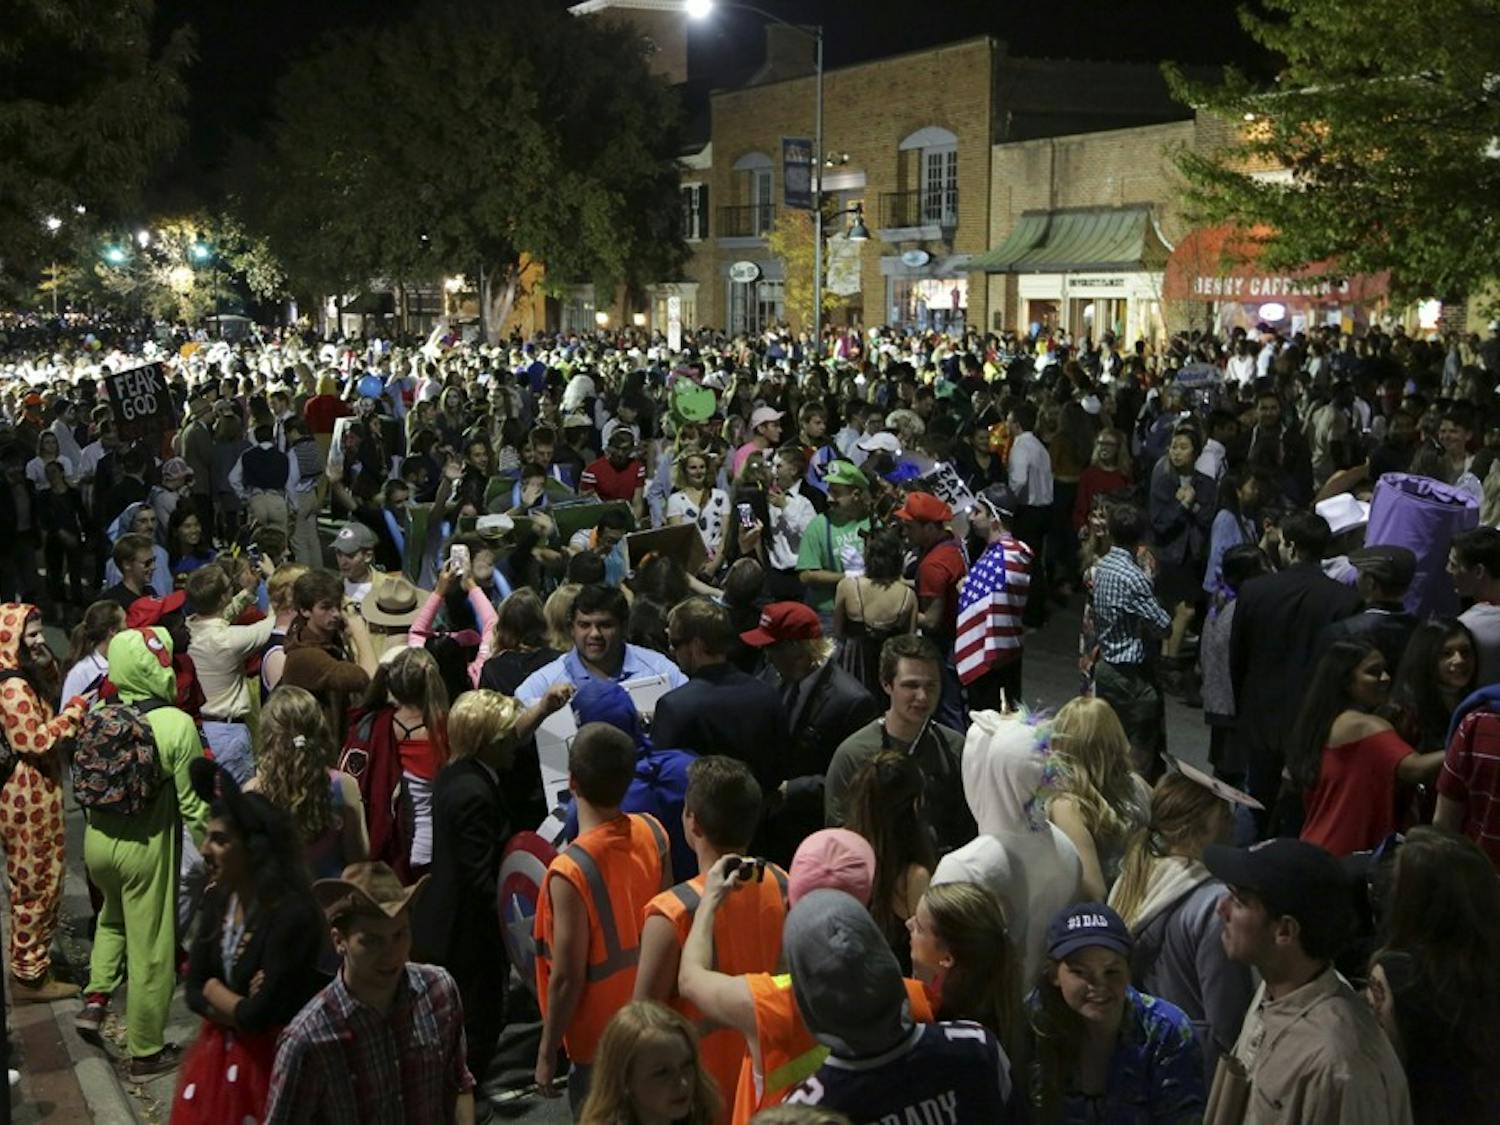 Part of the crowd for Halloween on Franklin St. in 2016.